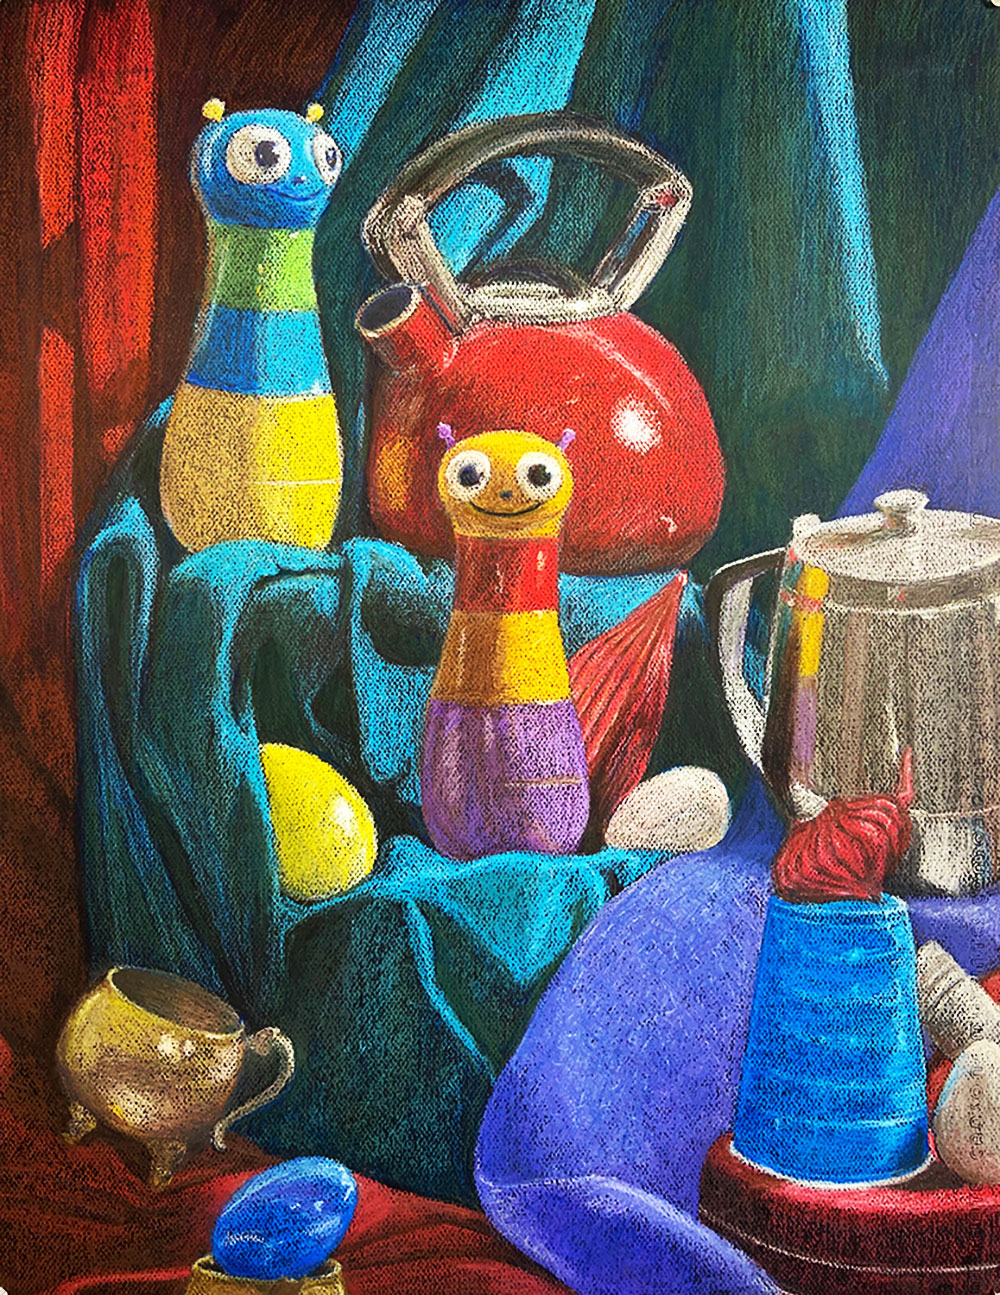 Colorful pastel still life drawing of: colorful toys with faces, a blue plastic cup, a red tea kettle, and a pear.